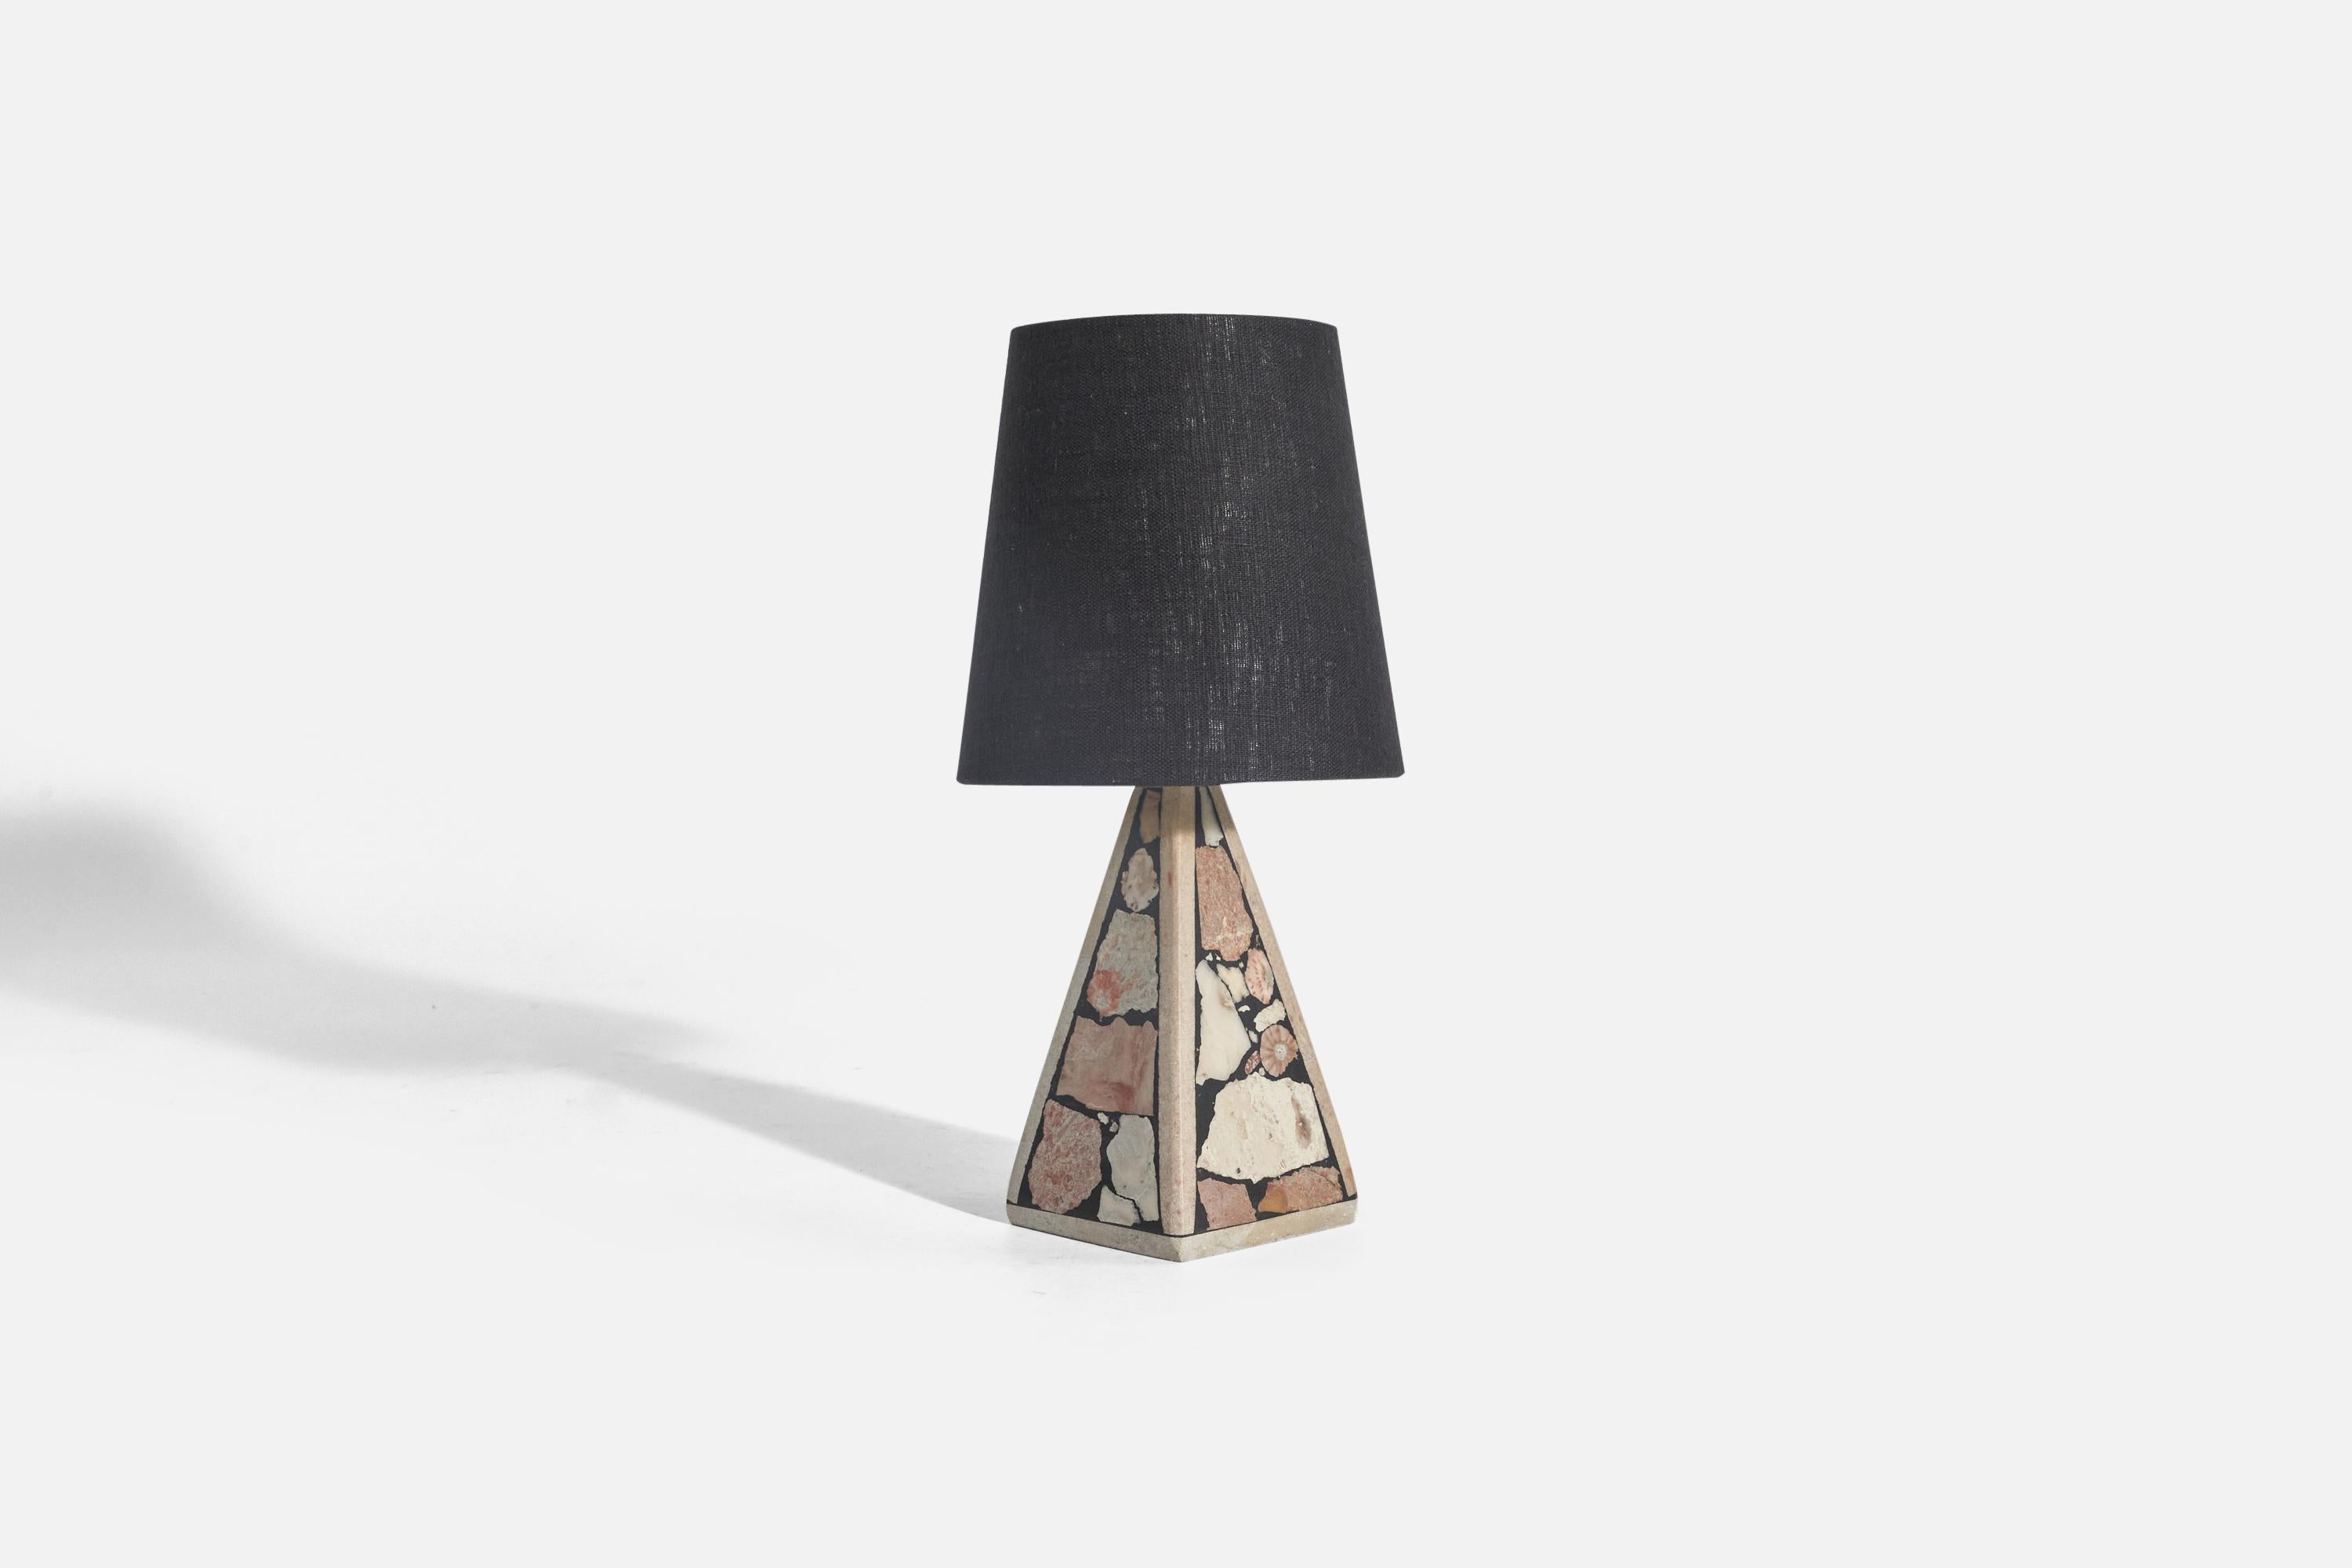 A solid stone table lamp with fossil pieces, Pietra Dura technique, designed and produced in Sweden, c. 1970s.

Sold with fabric Lampshade. 
Stated dimensions refer to the Lamp with the Shade. 

Socket takes standard E-26 medium base bulb.
There is